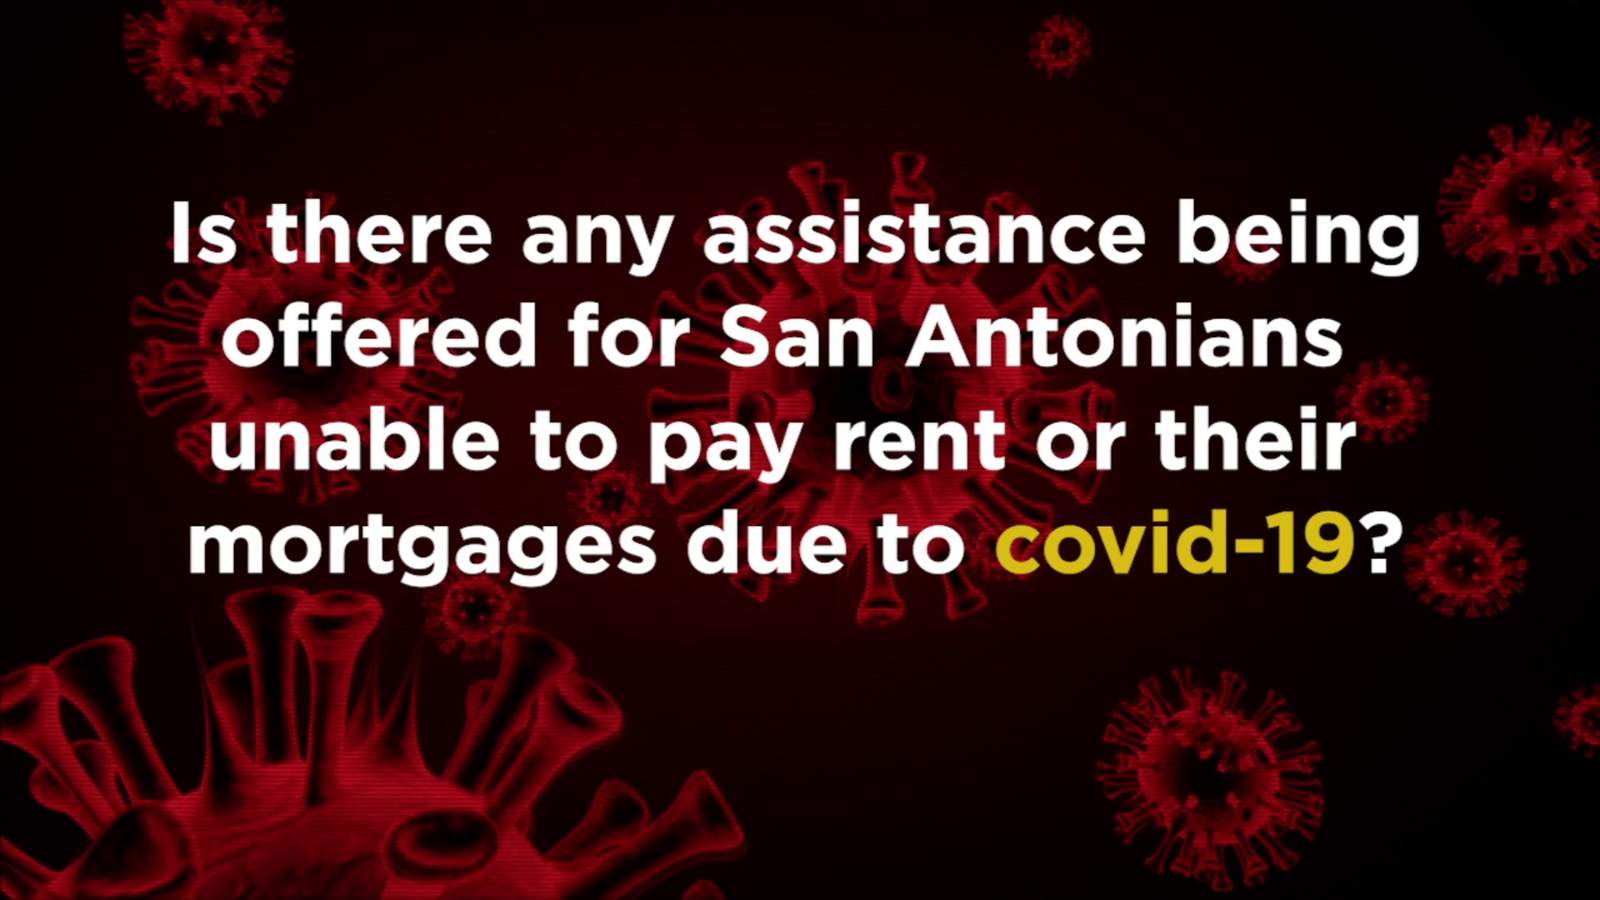 SAQ: Is there help if I can’t pay rent during the pandemic?